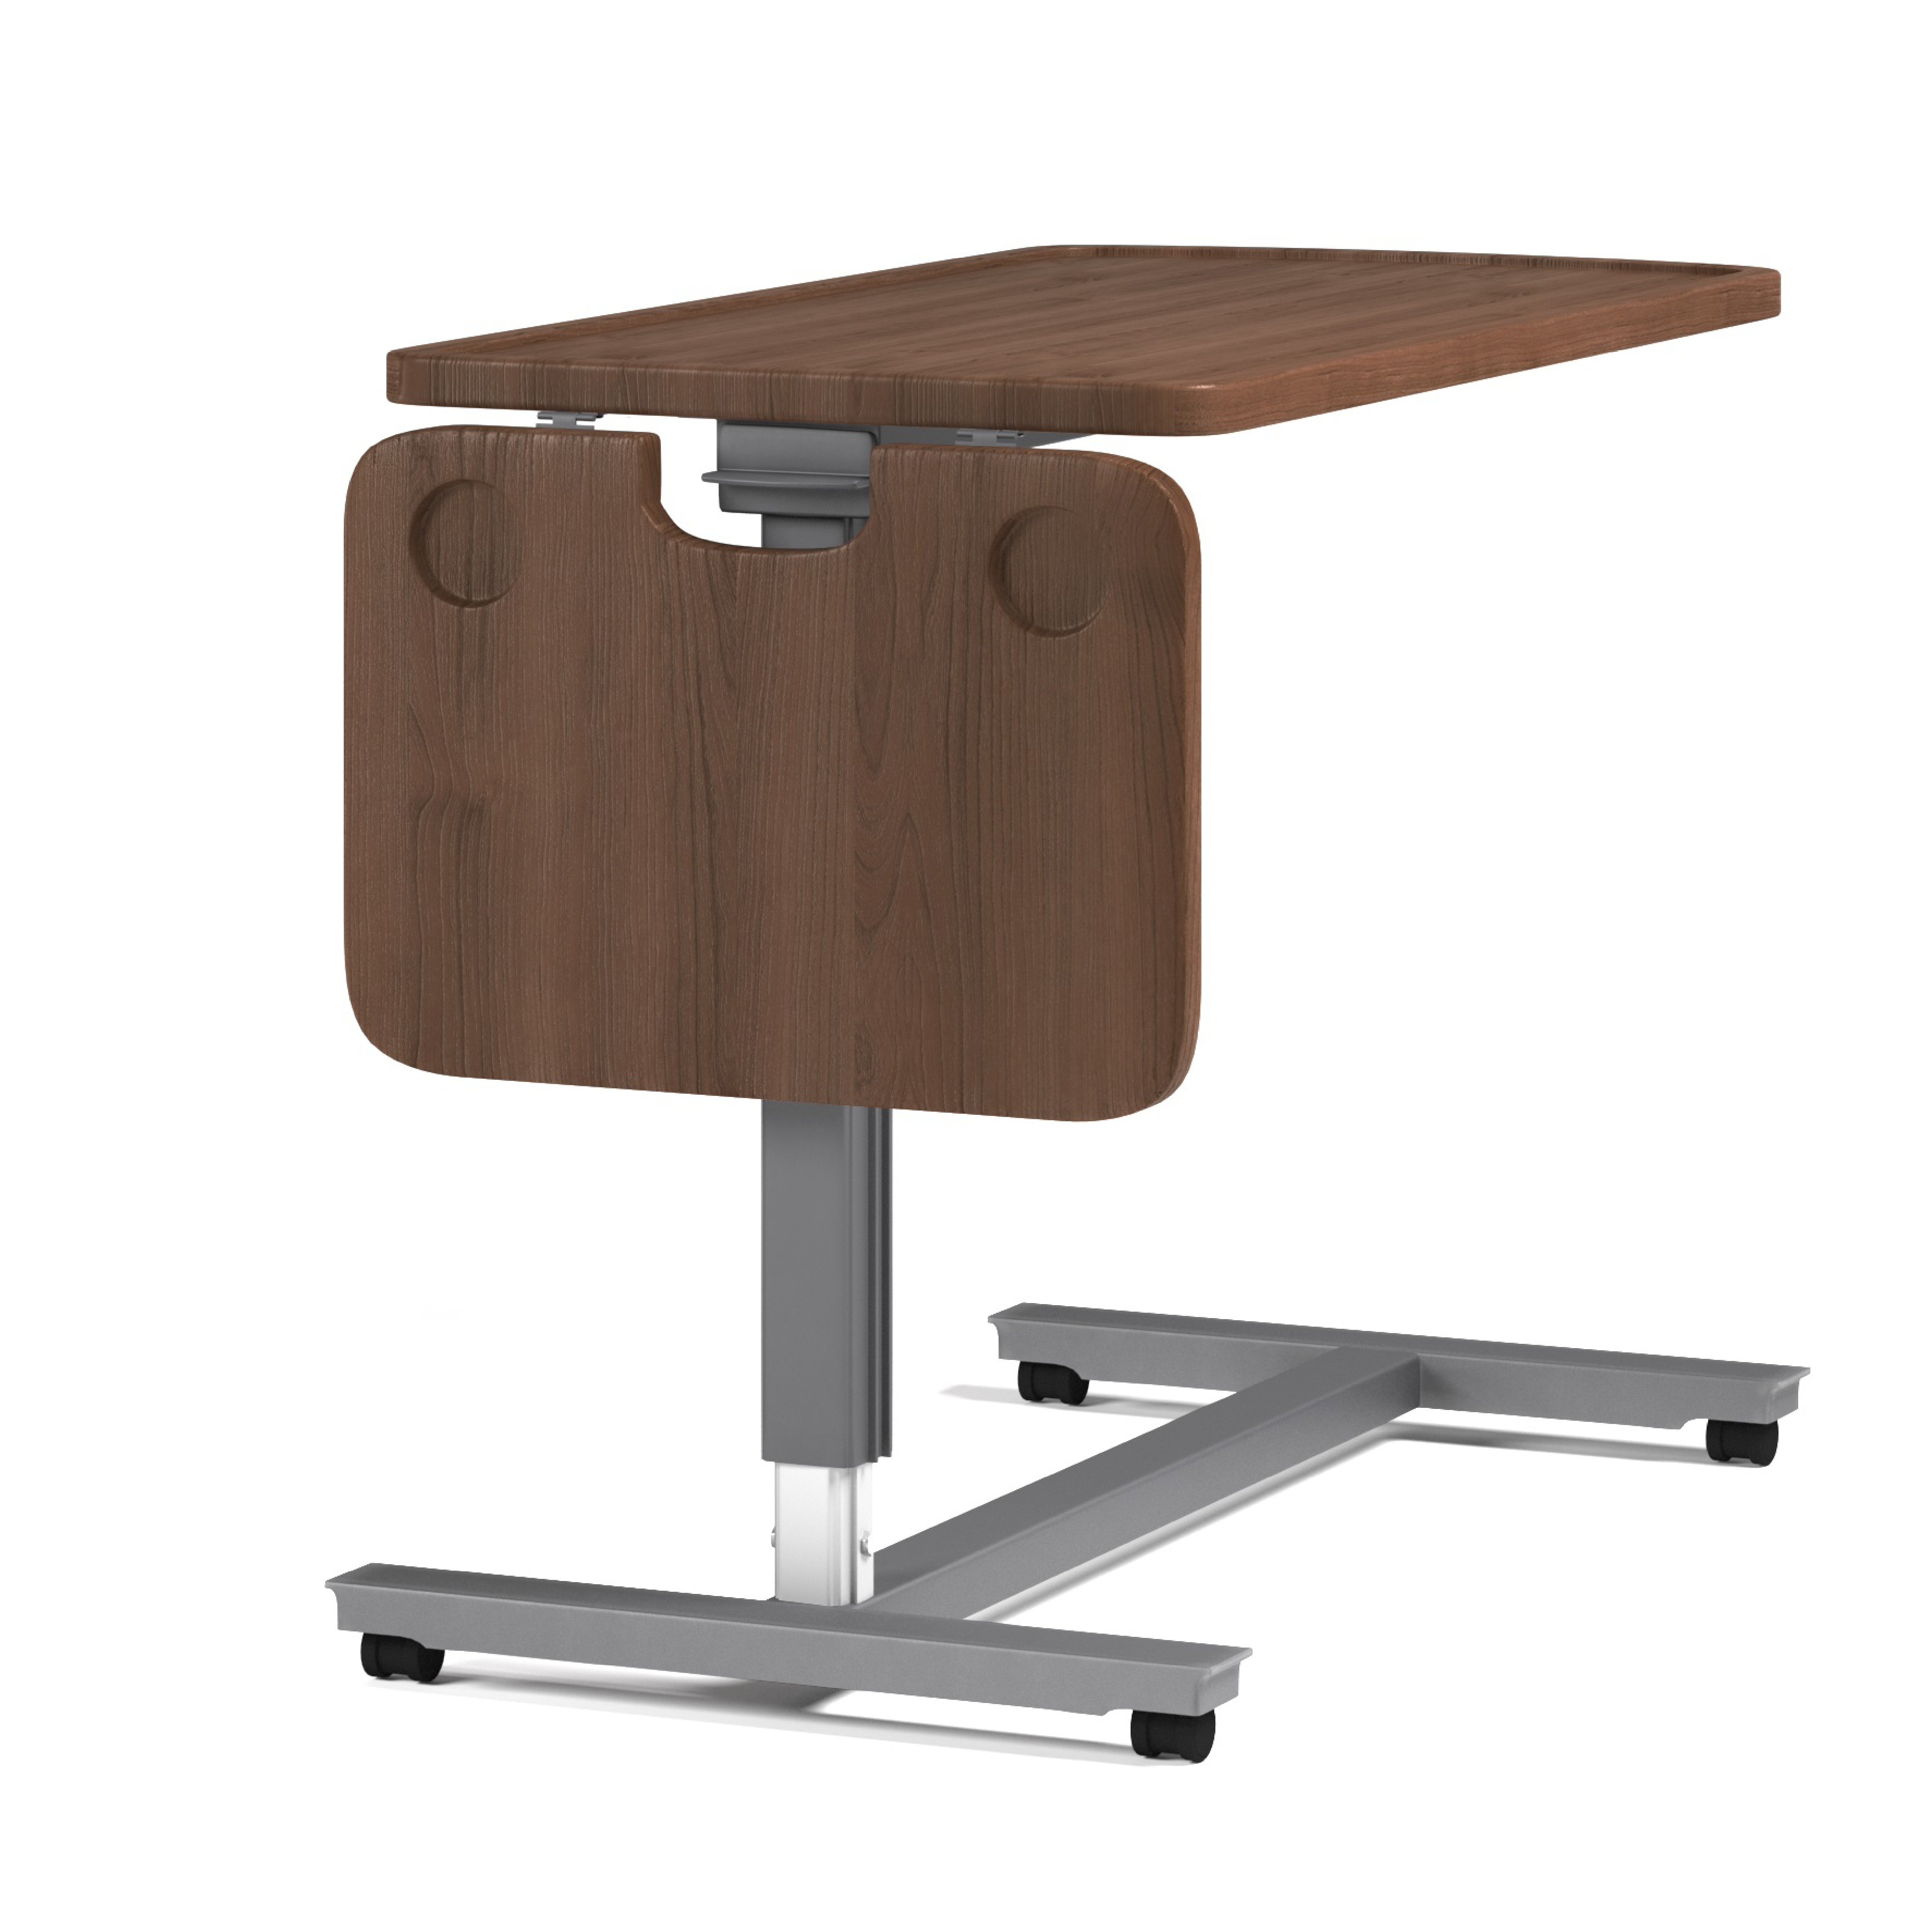 Adjustable overbed table with a tilting wooden top and wheeled base, ideal for #15395.